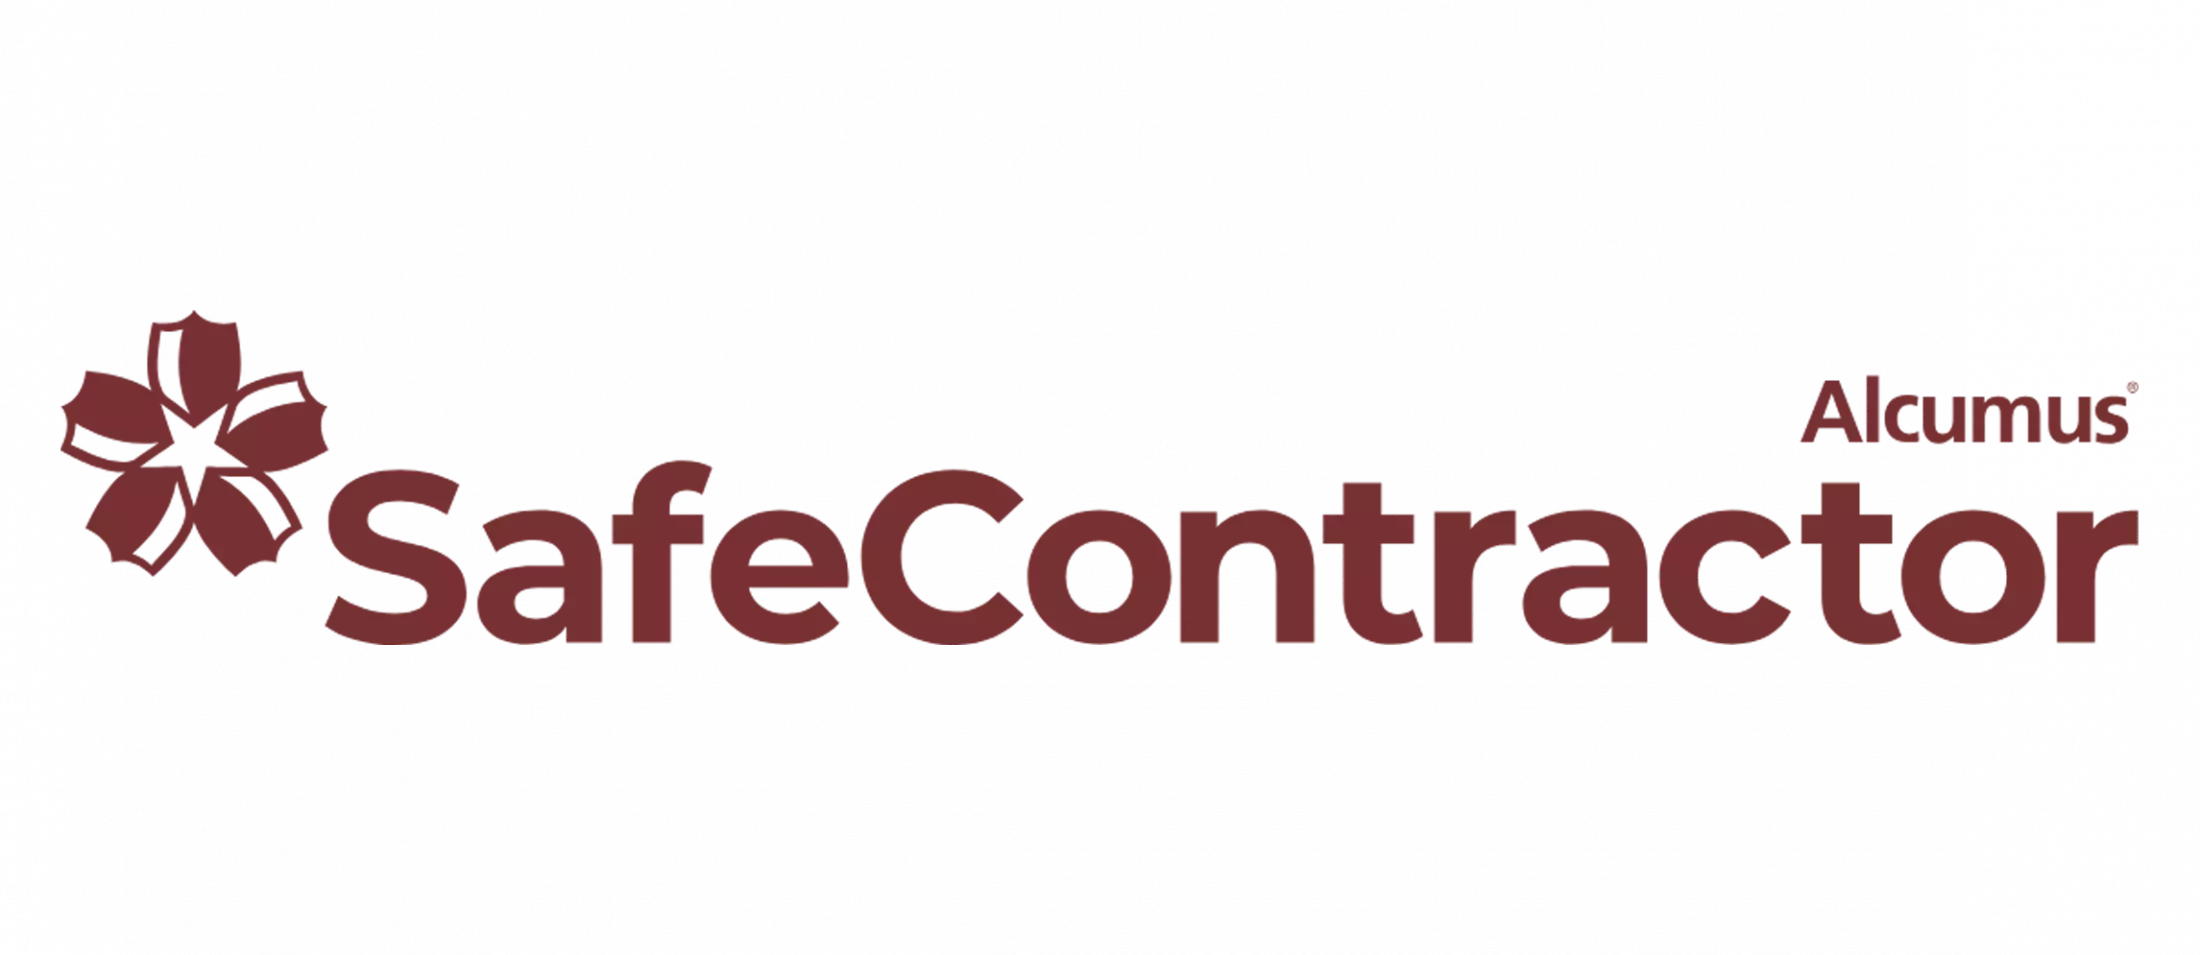 Stonedale Construction Ltd are proud to be SafeContractor accredited